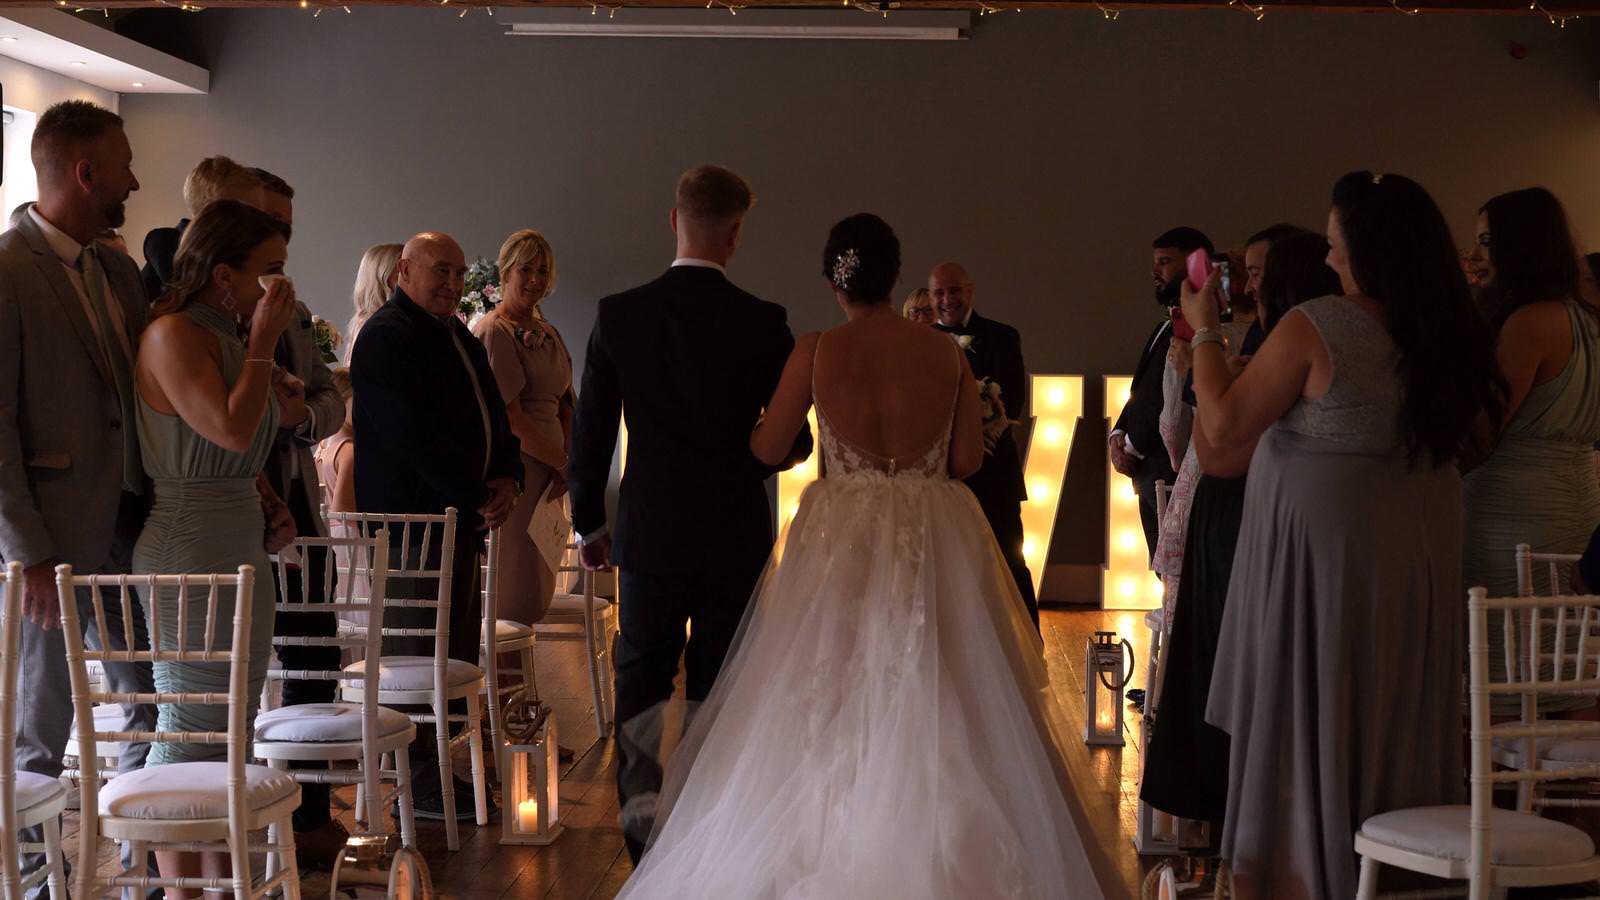 video still of bride walking down the aisle at Castlefield Rooms